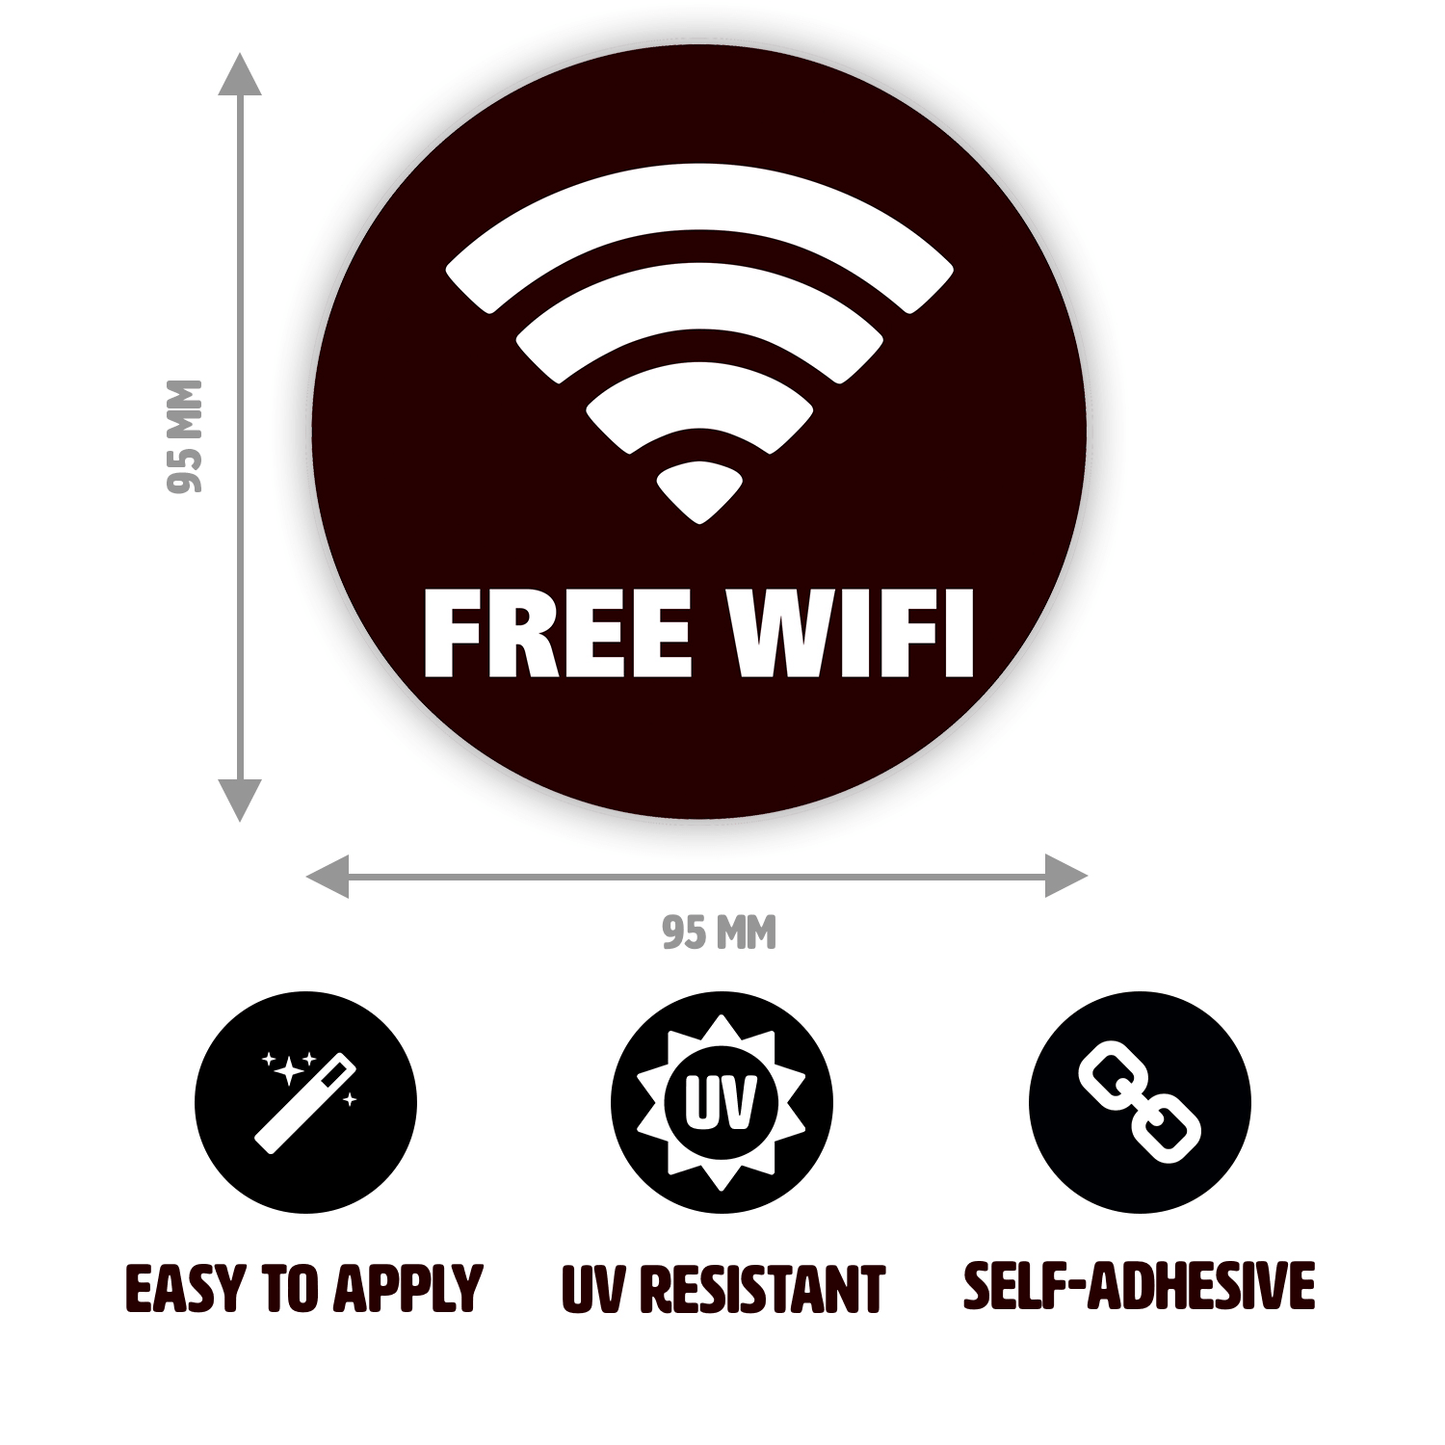 Free WiFi sticker with measurements 95 x 95mm